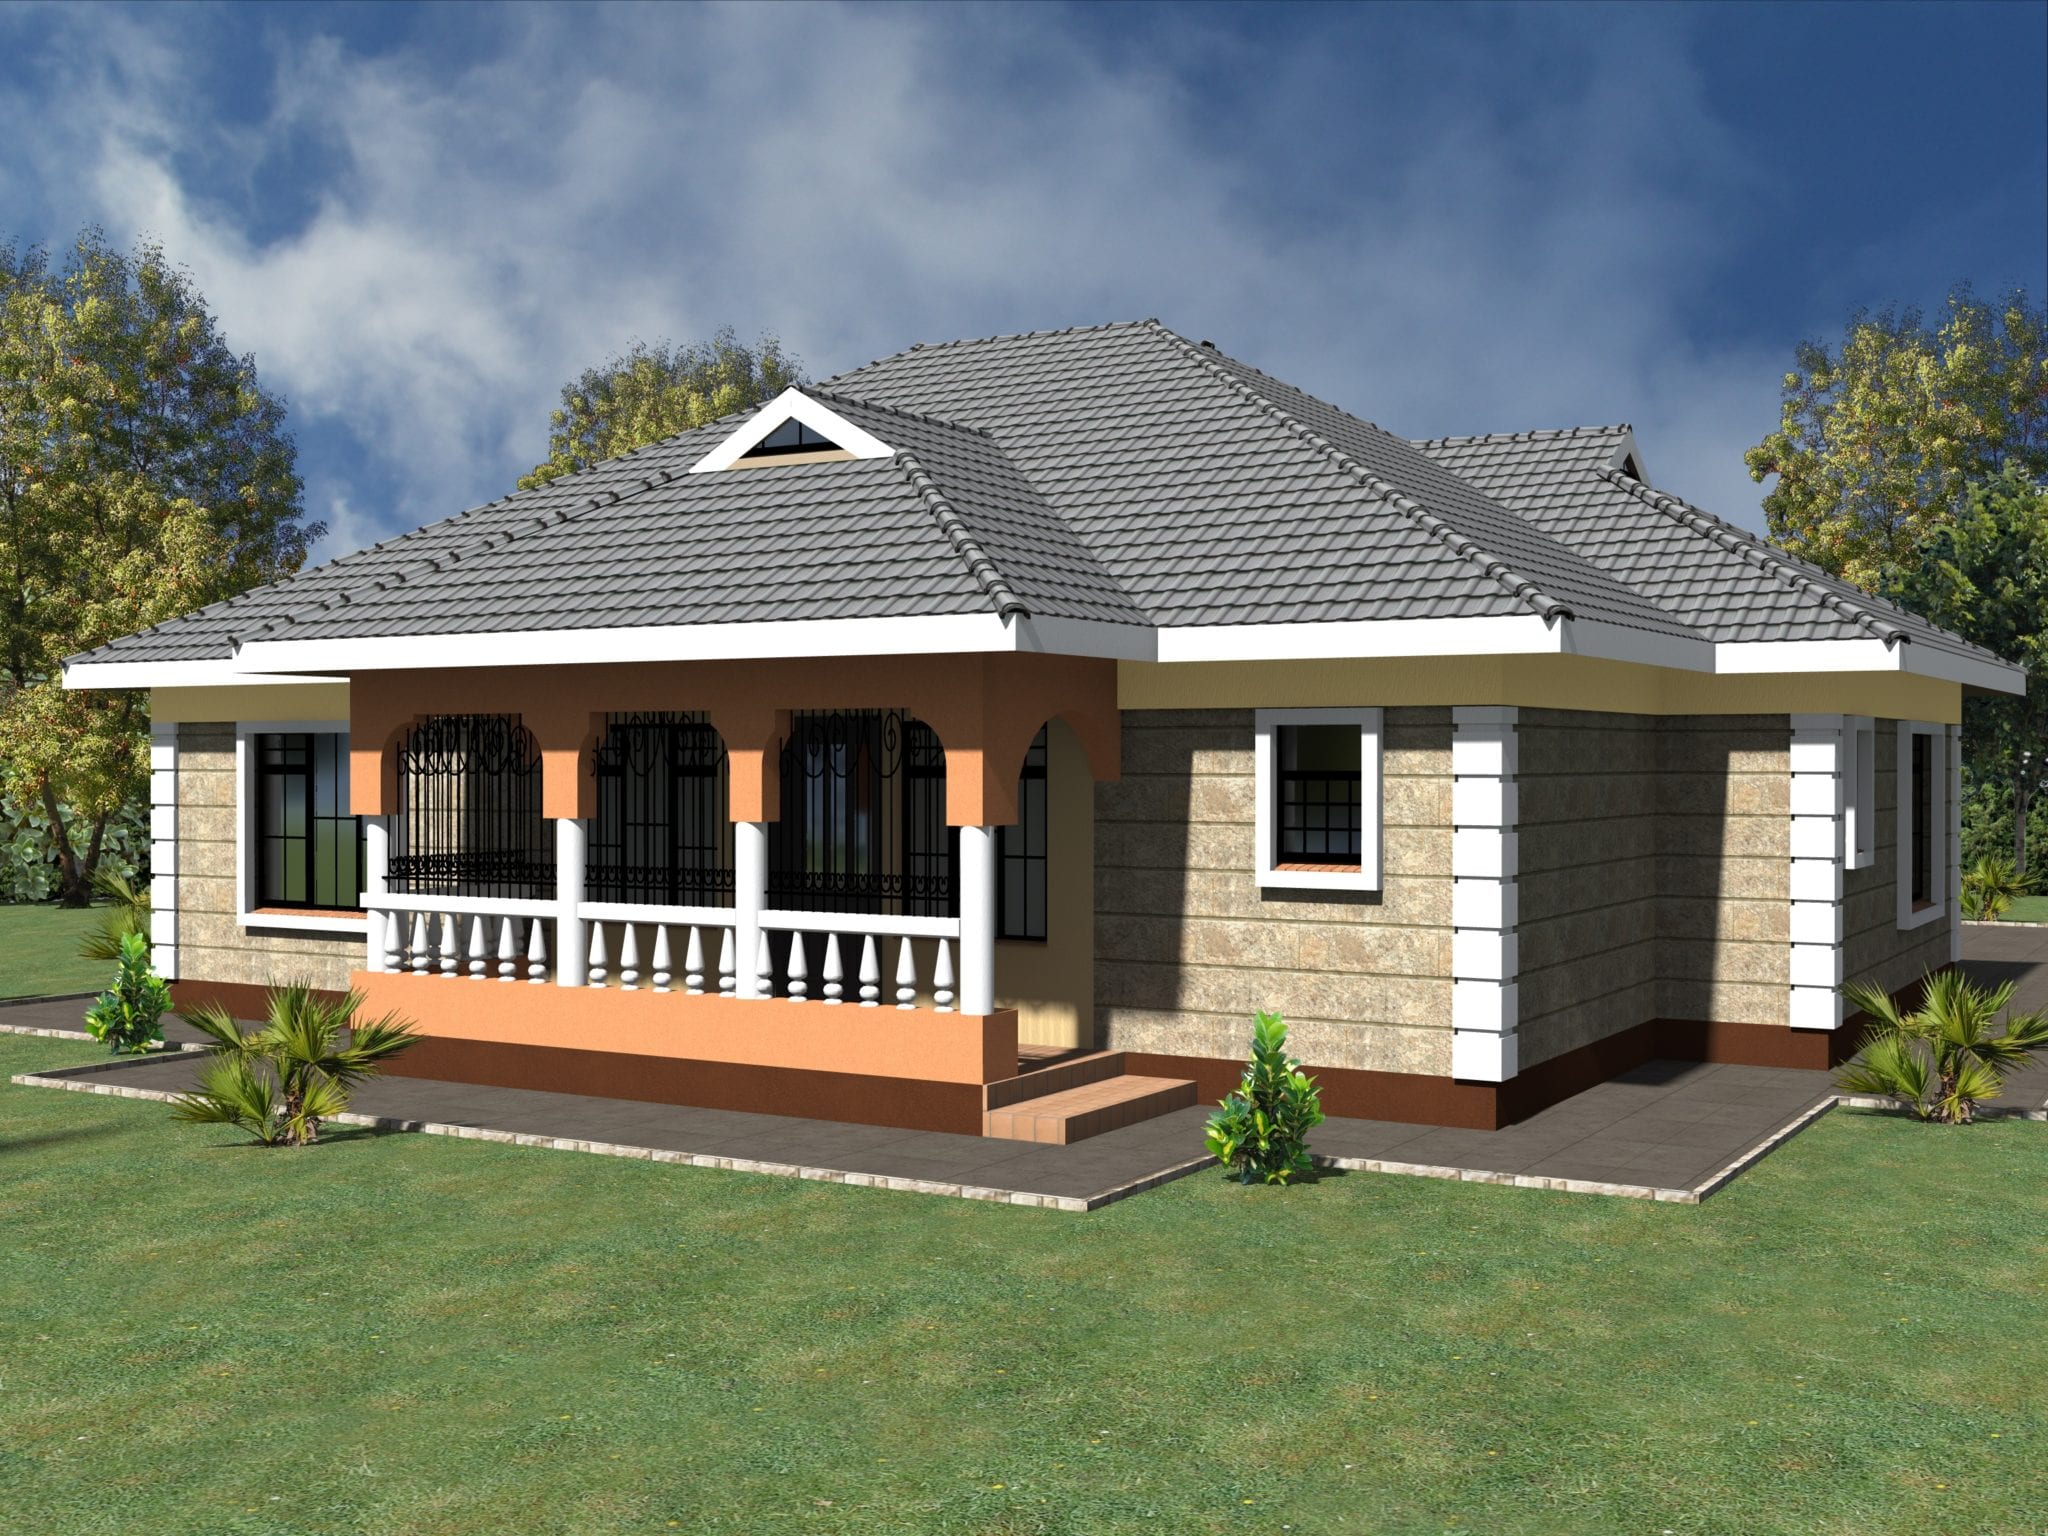 Simple 3 bedroom house plans without garage | HPD Consult